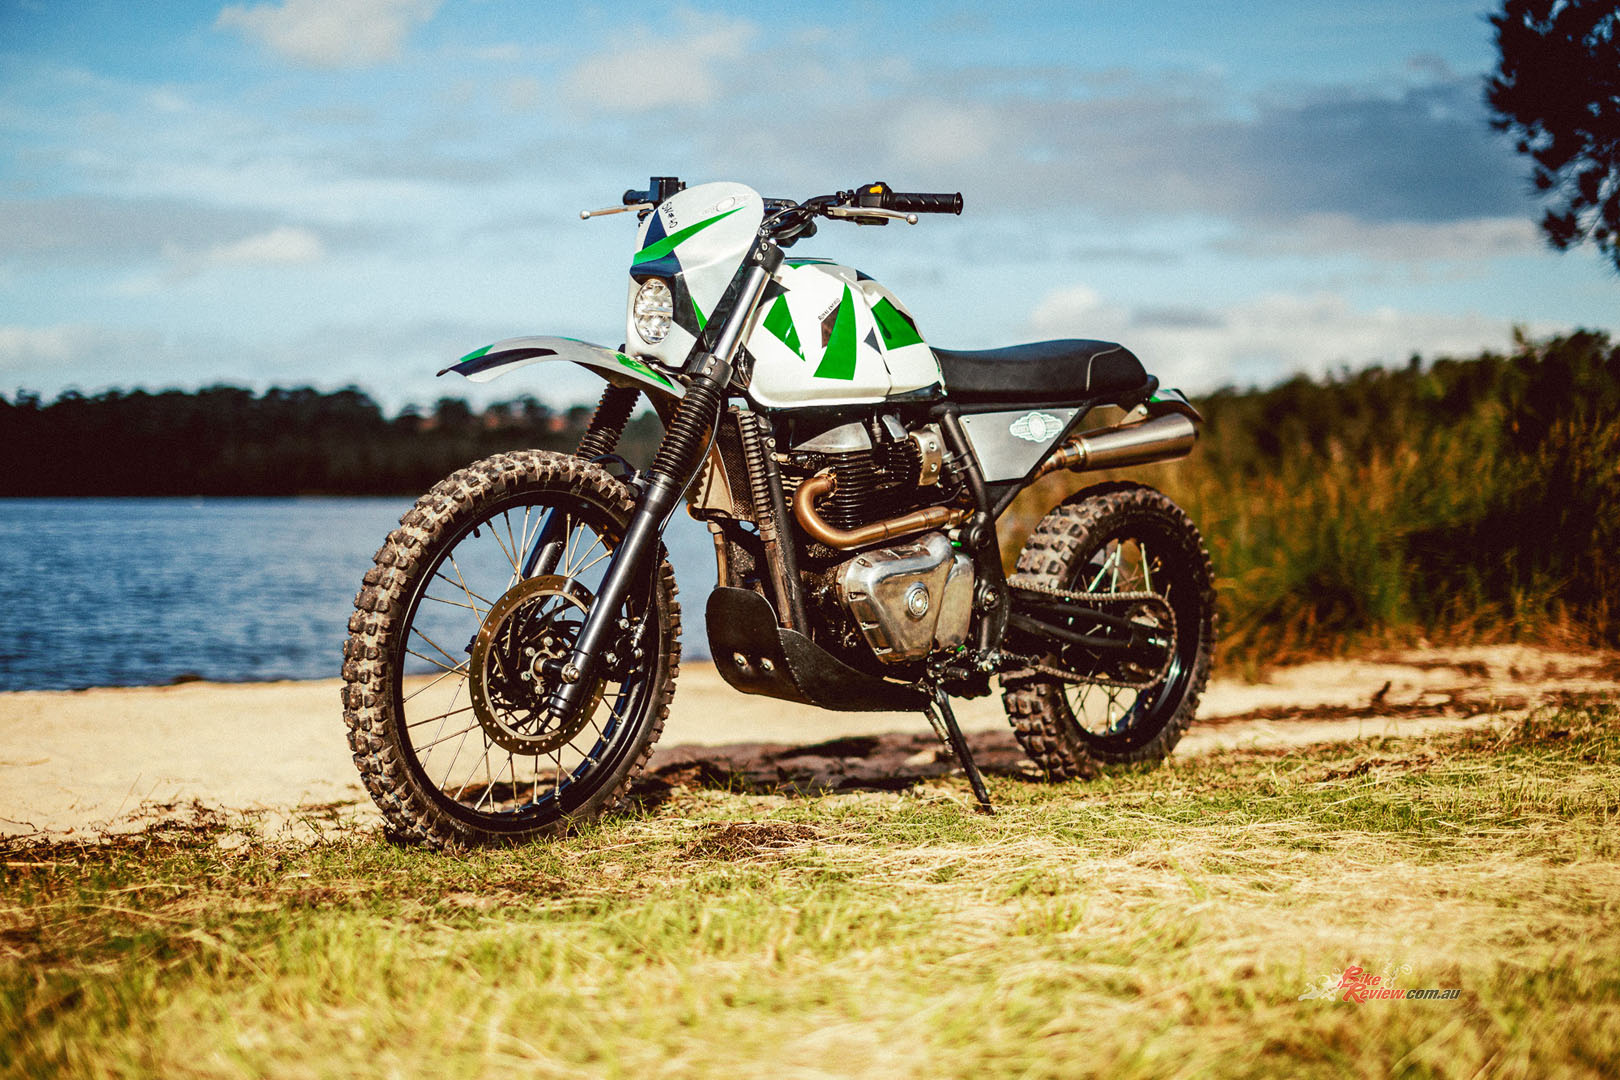 SurfSide Motorcycle Garage, Sydney took what Himalayan fans have been dreaming of and turned it into reality with the ‘No. 40’ Himalayan 650 Twin.